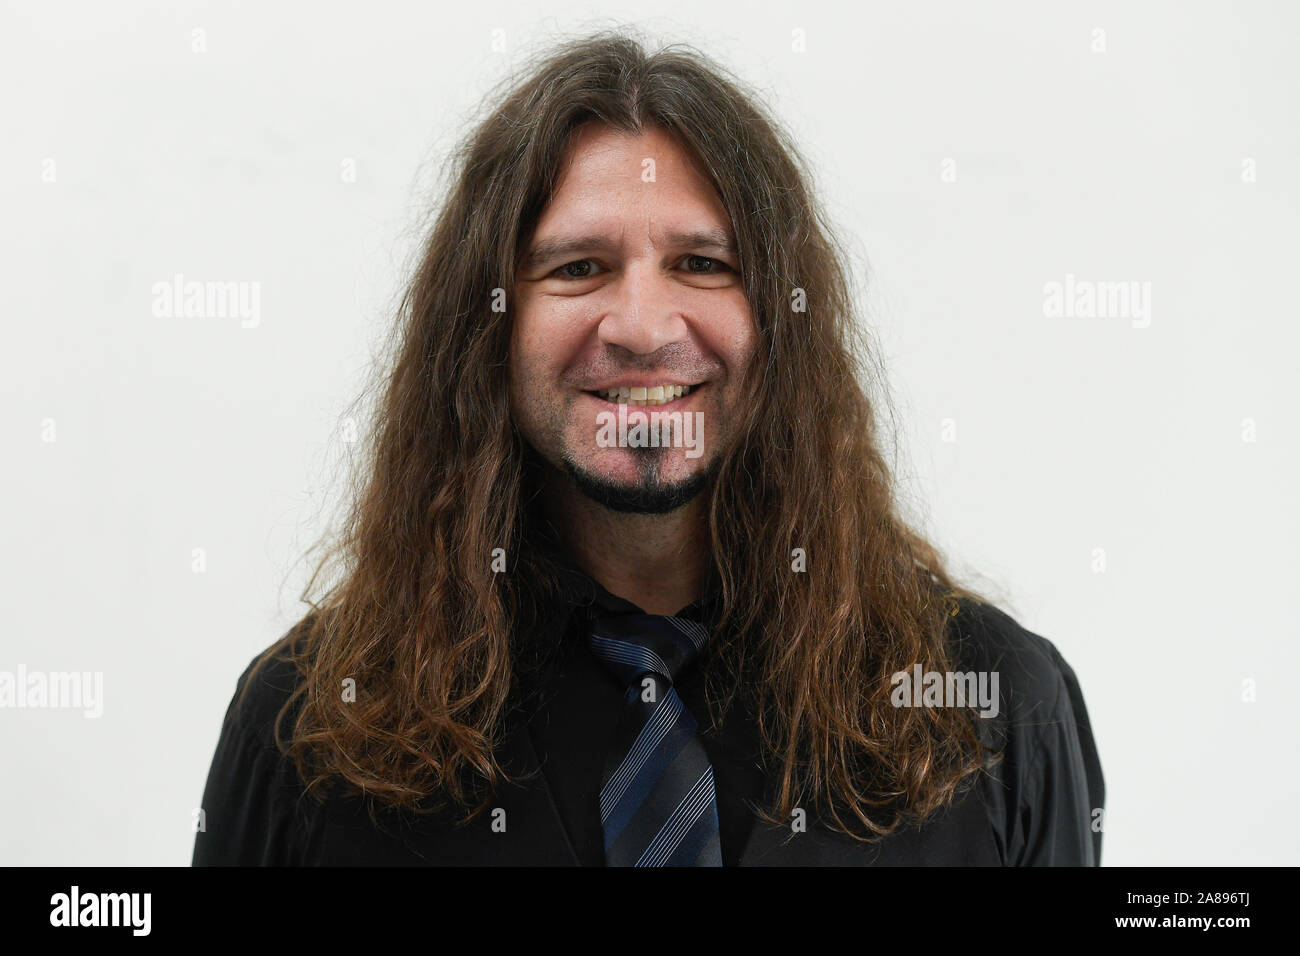 Prague, Czech Republic. 07th Nov, 2019. Greek-Canadian musician Phil Theofilos Xenidis, known as Phil X, poses for the photographer during an interview for the Czech News Agency (CTK) in Prague, Czech Republic, on November 7, 2019. Phil X plays with the Bon Jovi music band. Credit: Ondrej Deml/CTK Photo/Alamy Live News Stock Photo